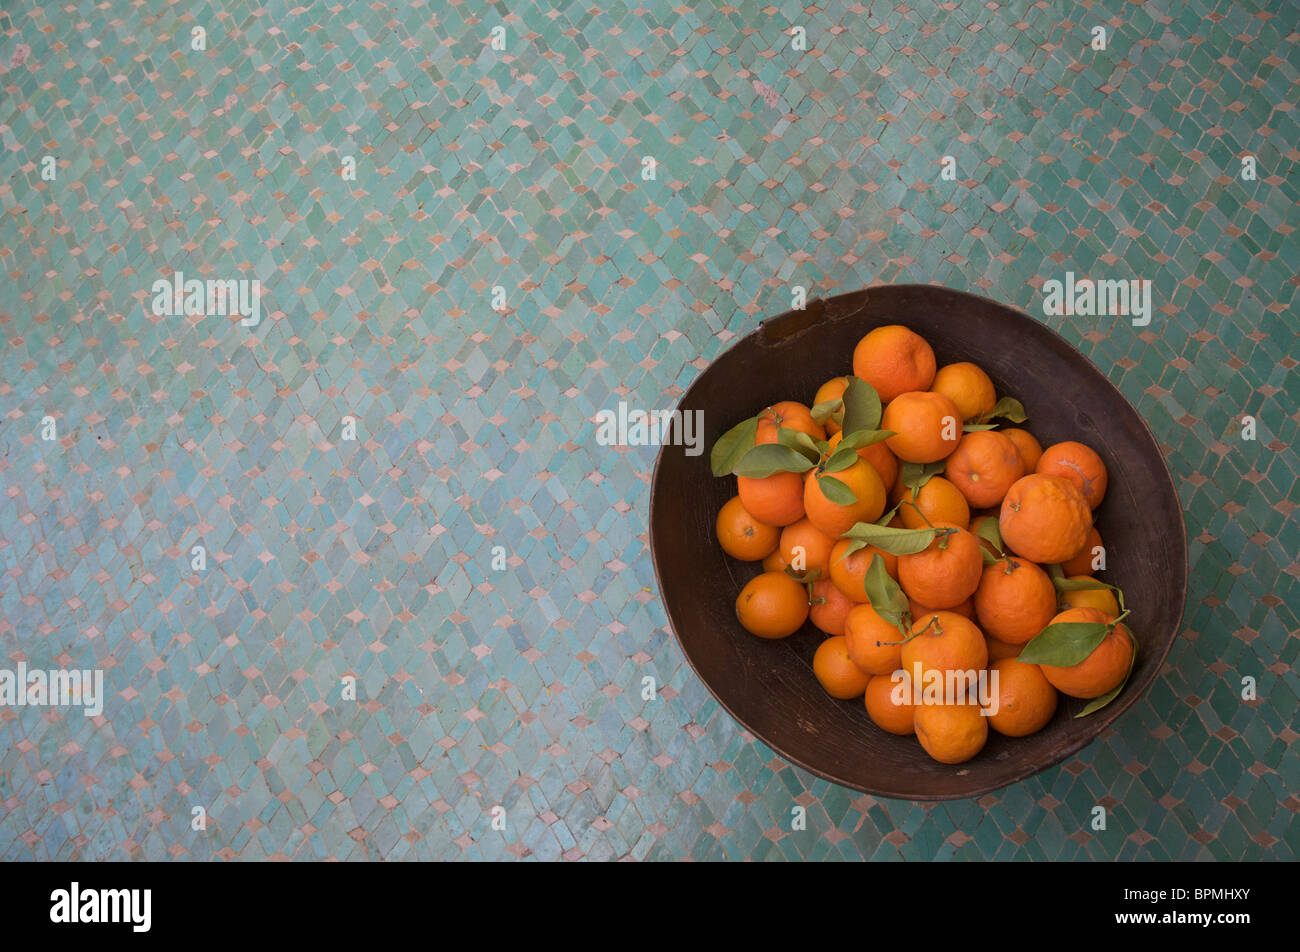 A bowl of oranges in a villa in the Palmeraie, Marrakech, Morocco, North Africa Stock Photo